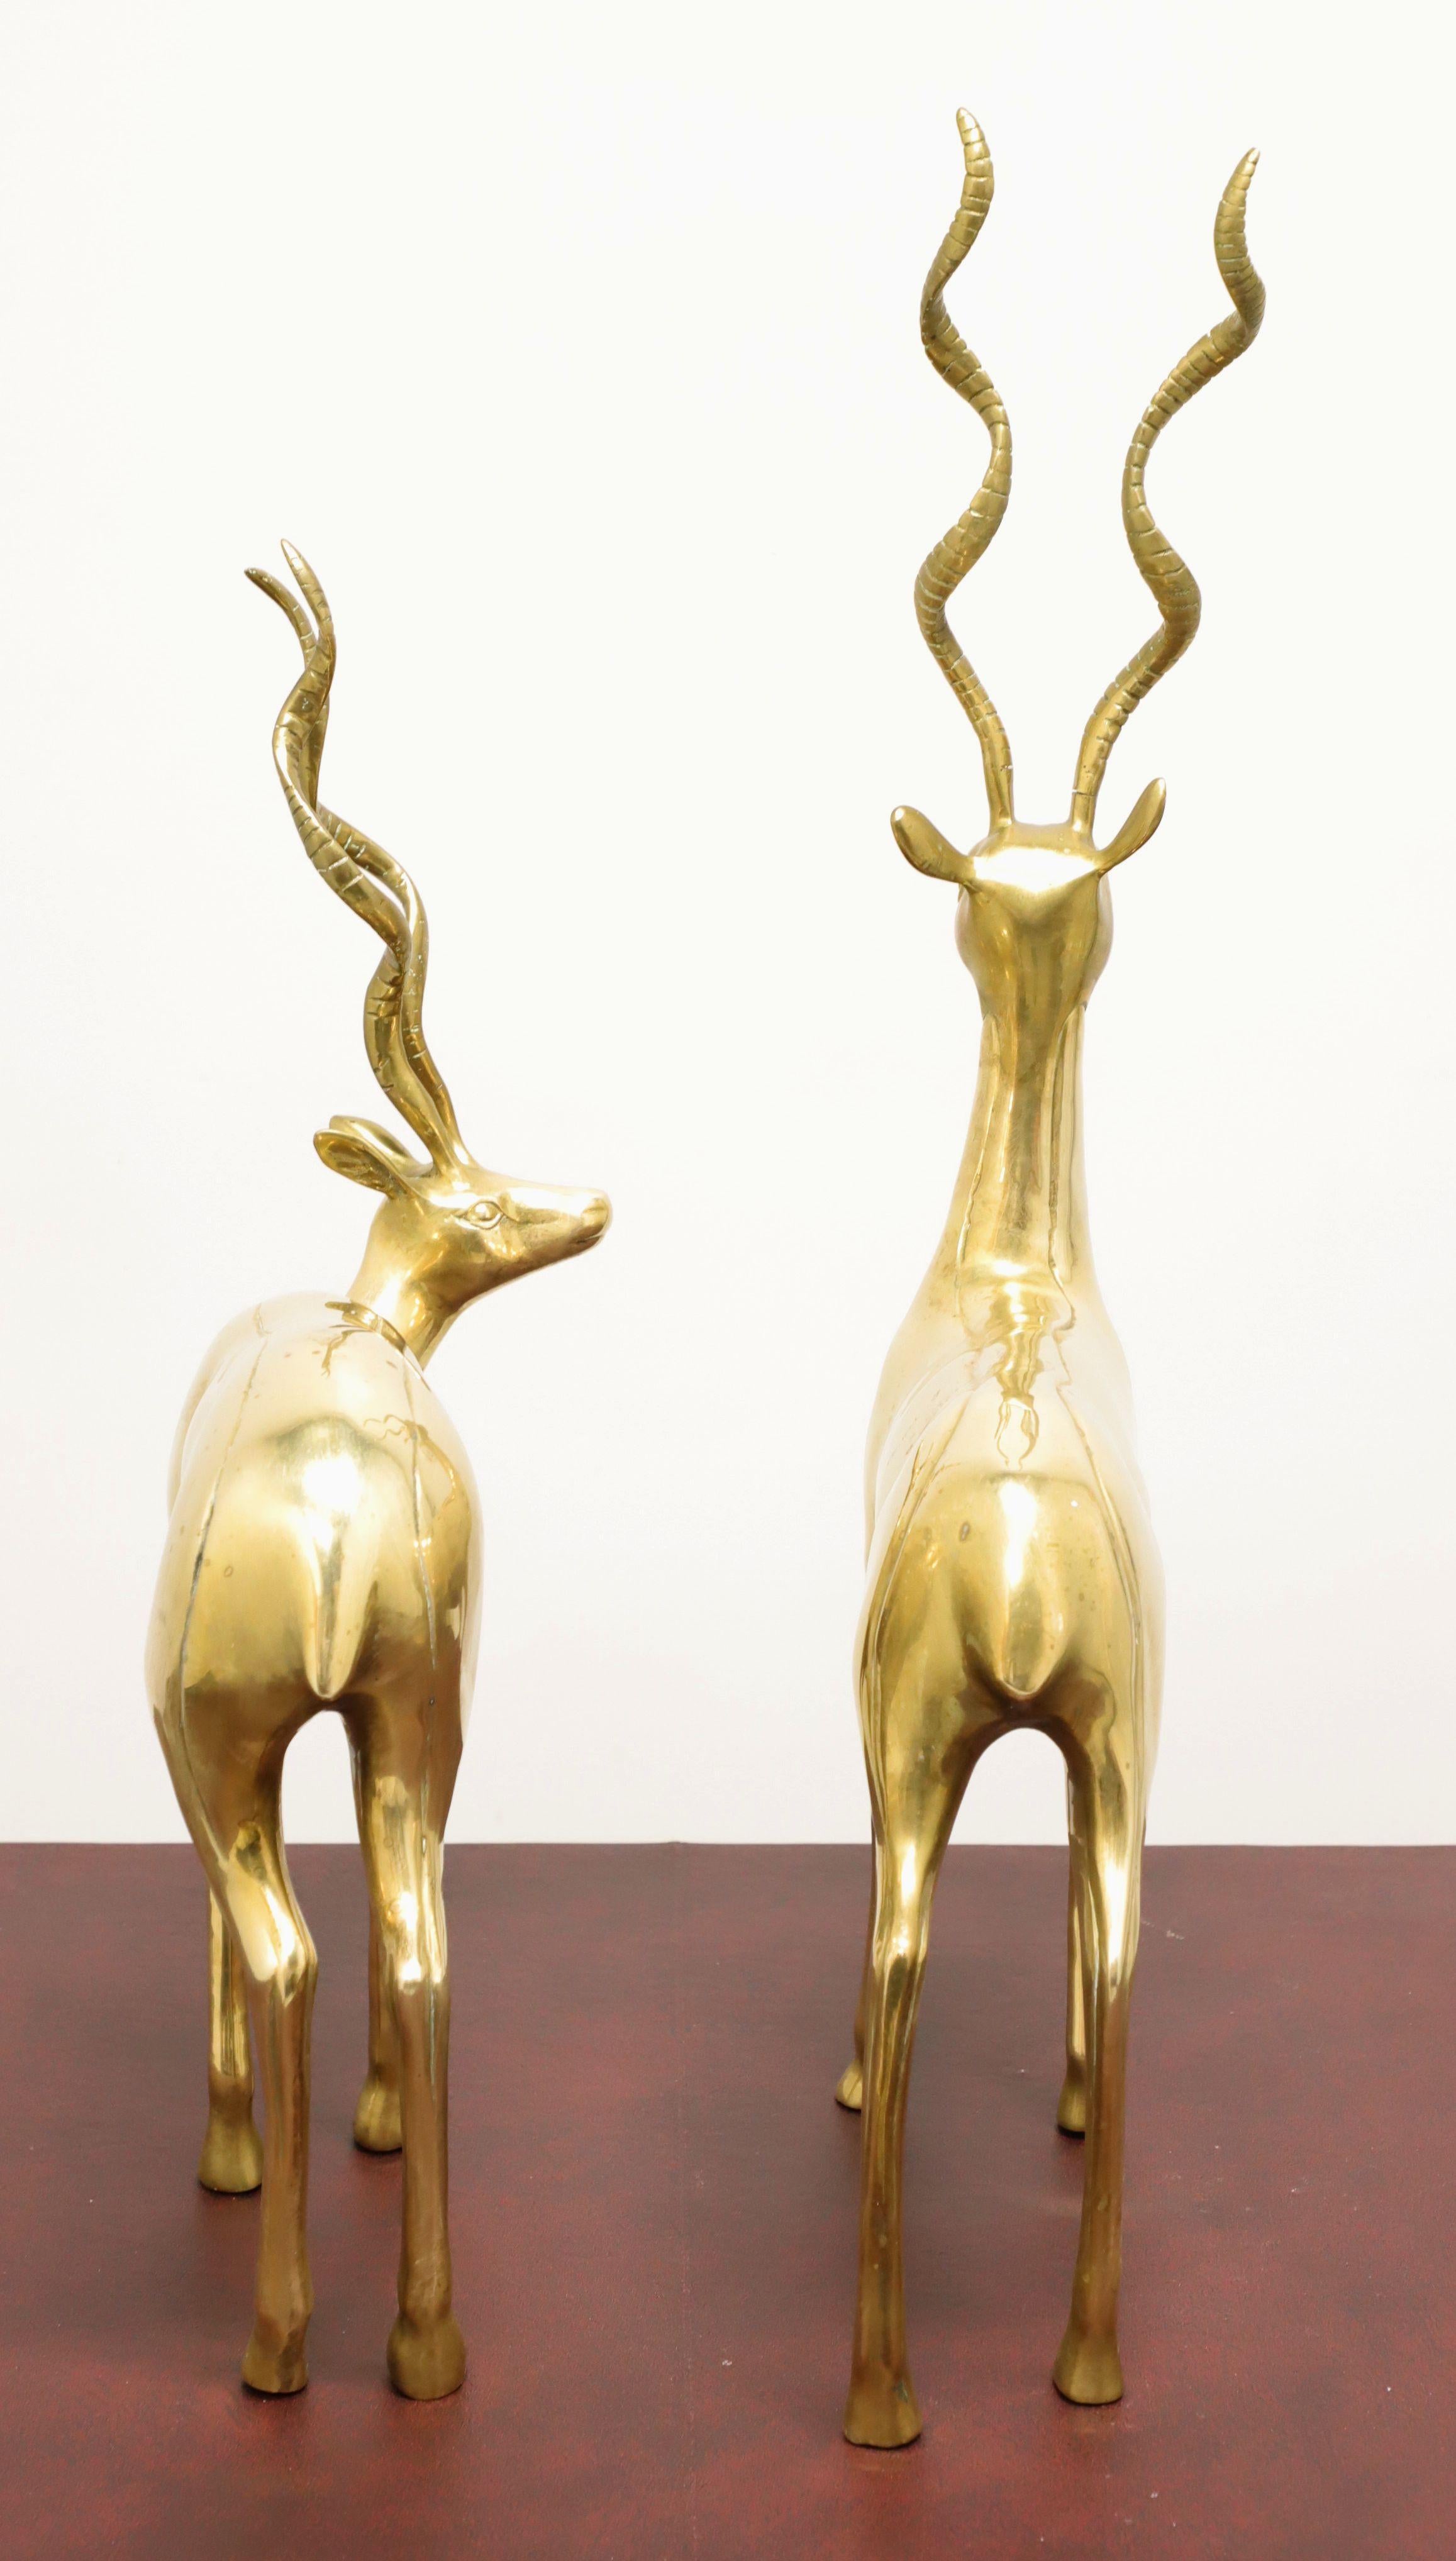 American Mid 20th Century Large Brass Standing Antelope Sculptures - Pair For Sale